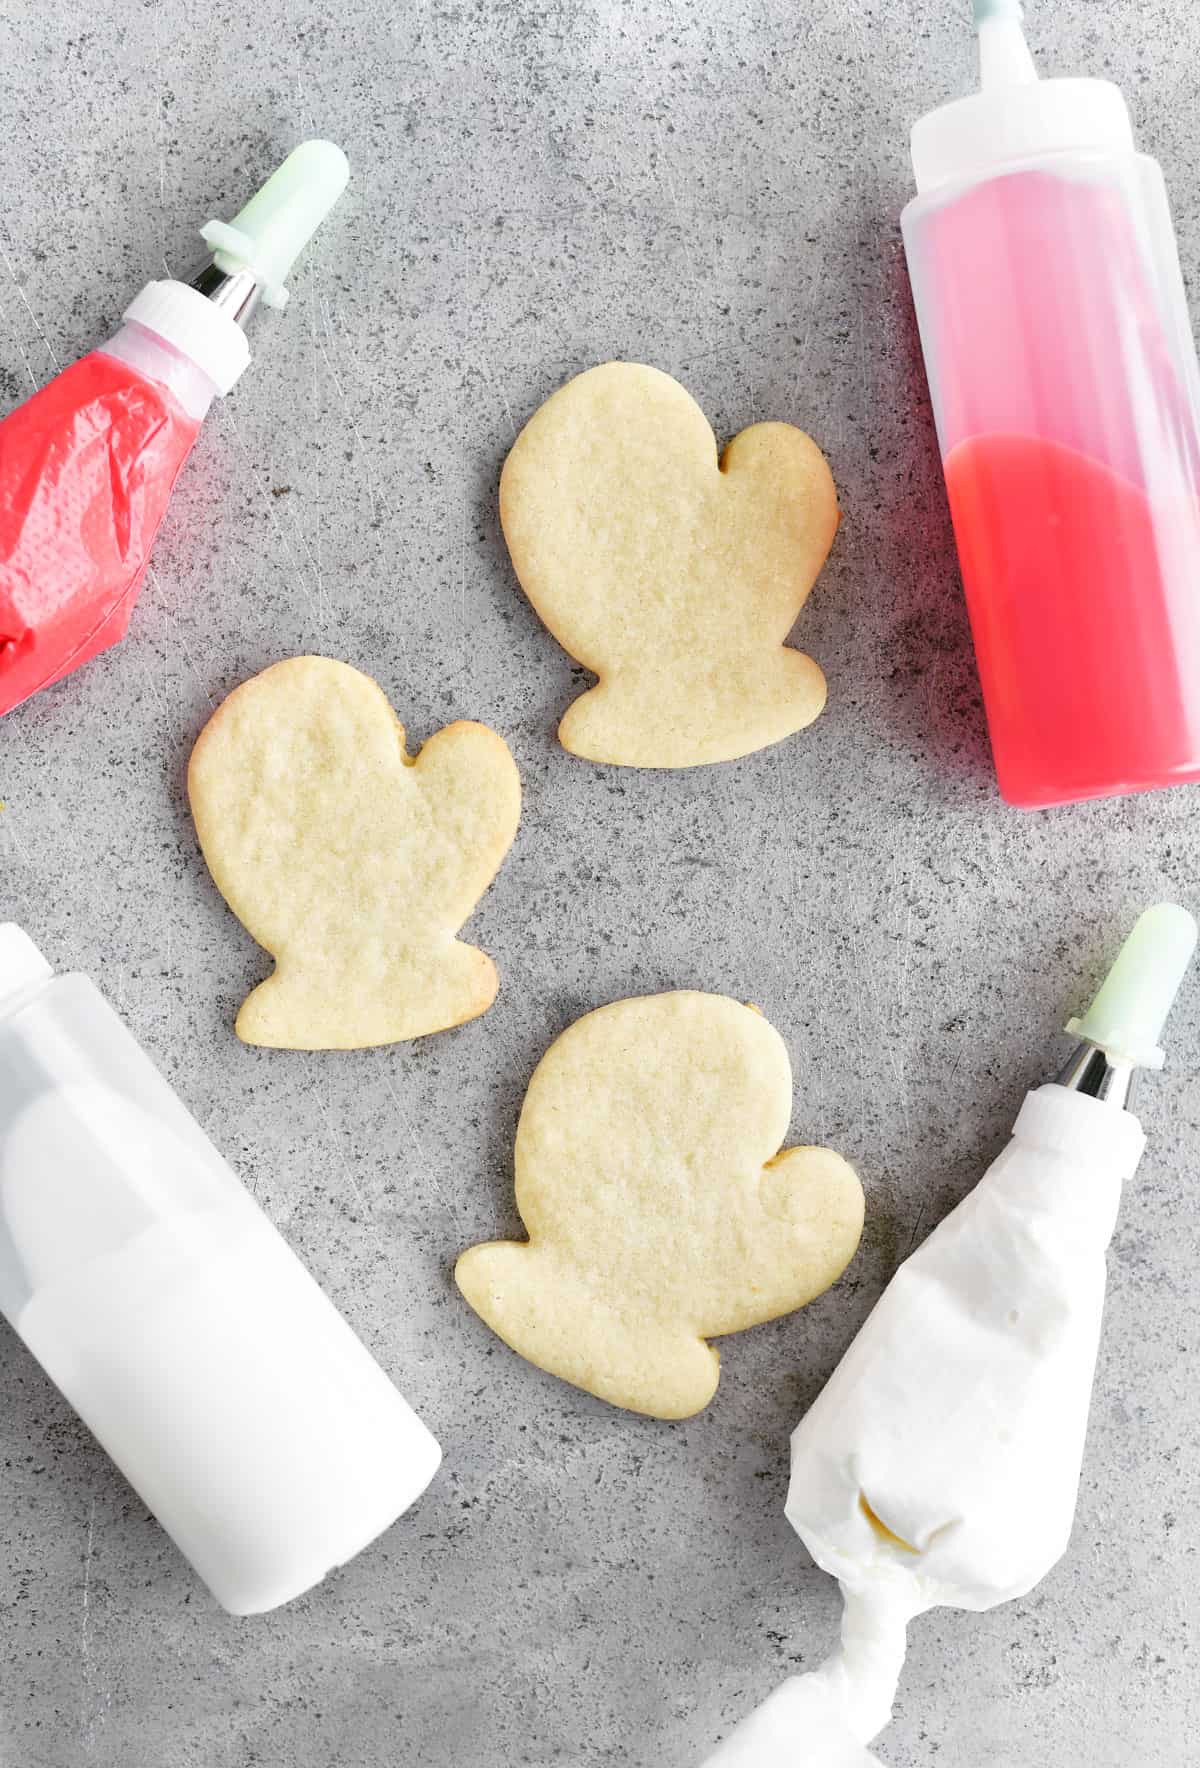 Sugar cookie decorating party supplies. Squeezy bottles of royal icing for  easy use. : r/Baking